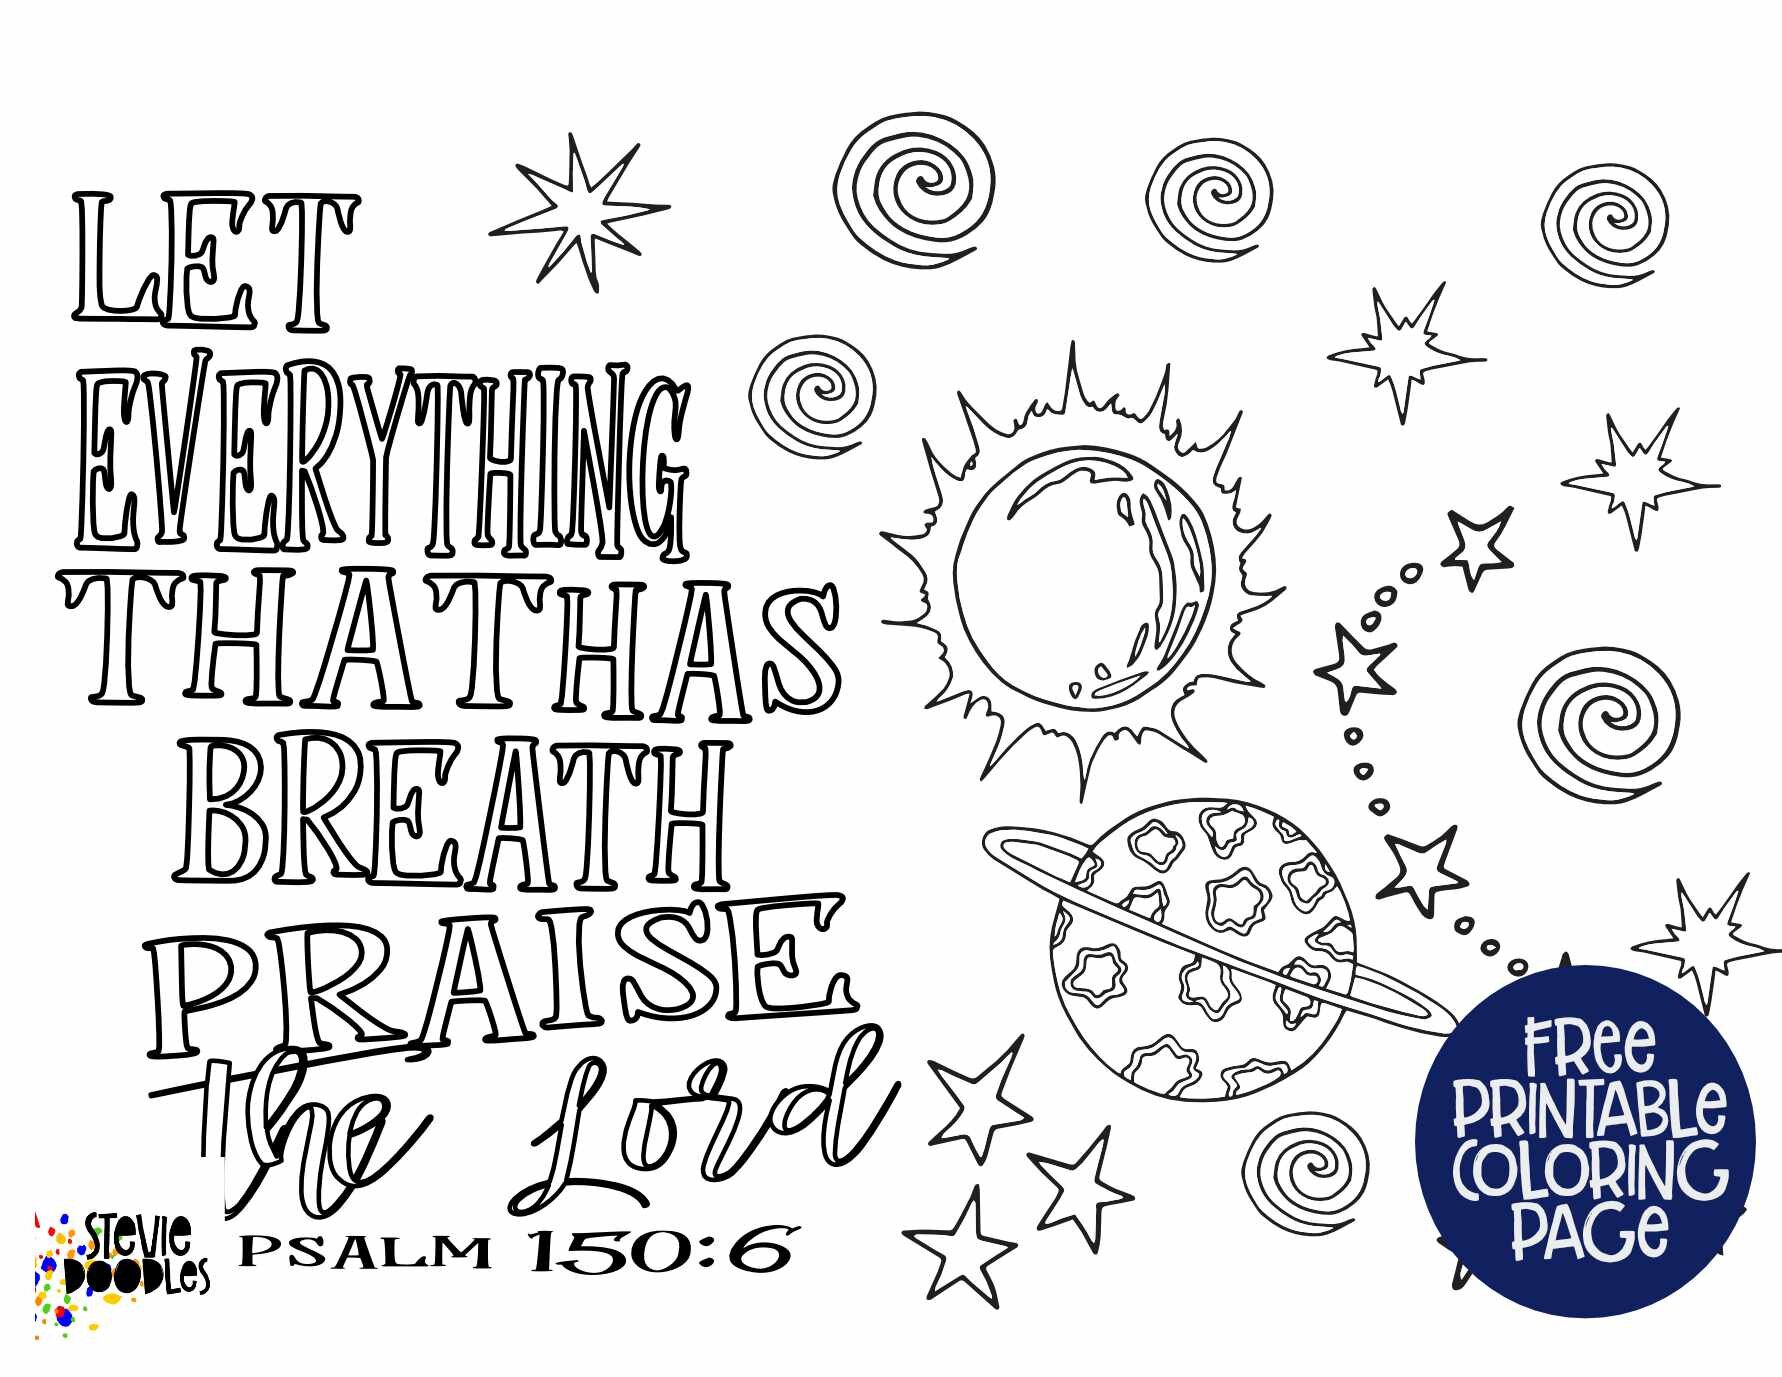 5 Free Printables! 4 Memory Verses on 1 page + each page as a separate printable coloring page Let everything that has breath praise the Lord - Psalm 150:6